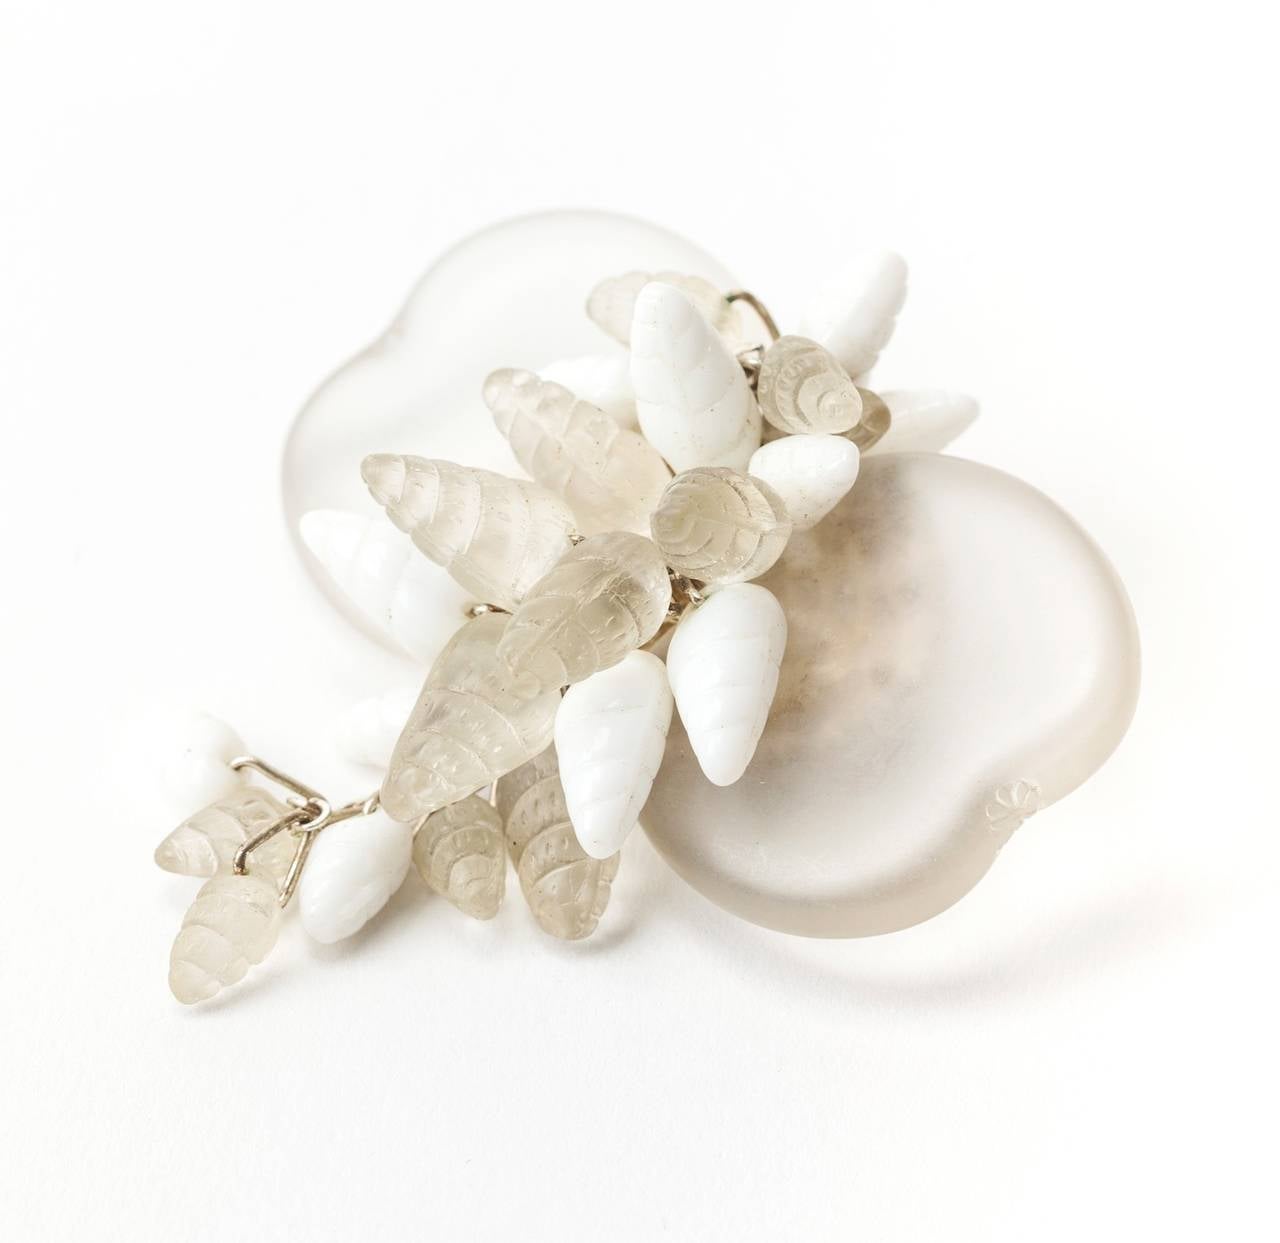 Miriam Haskell's dangling sea shell brooch with 3 different kinds of glass...frosted beach glass, molded milk glass and frosted camphor glass  shells. The brooch set in silver gilt signature filigree. Excellent condition.
W 2.25